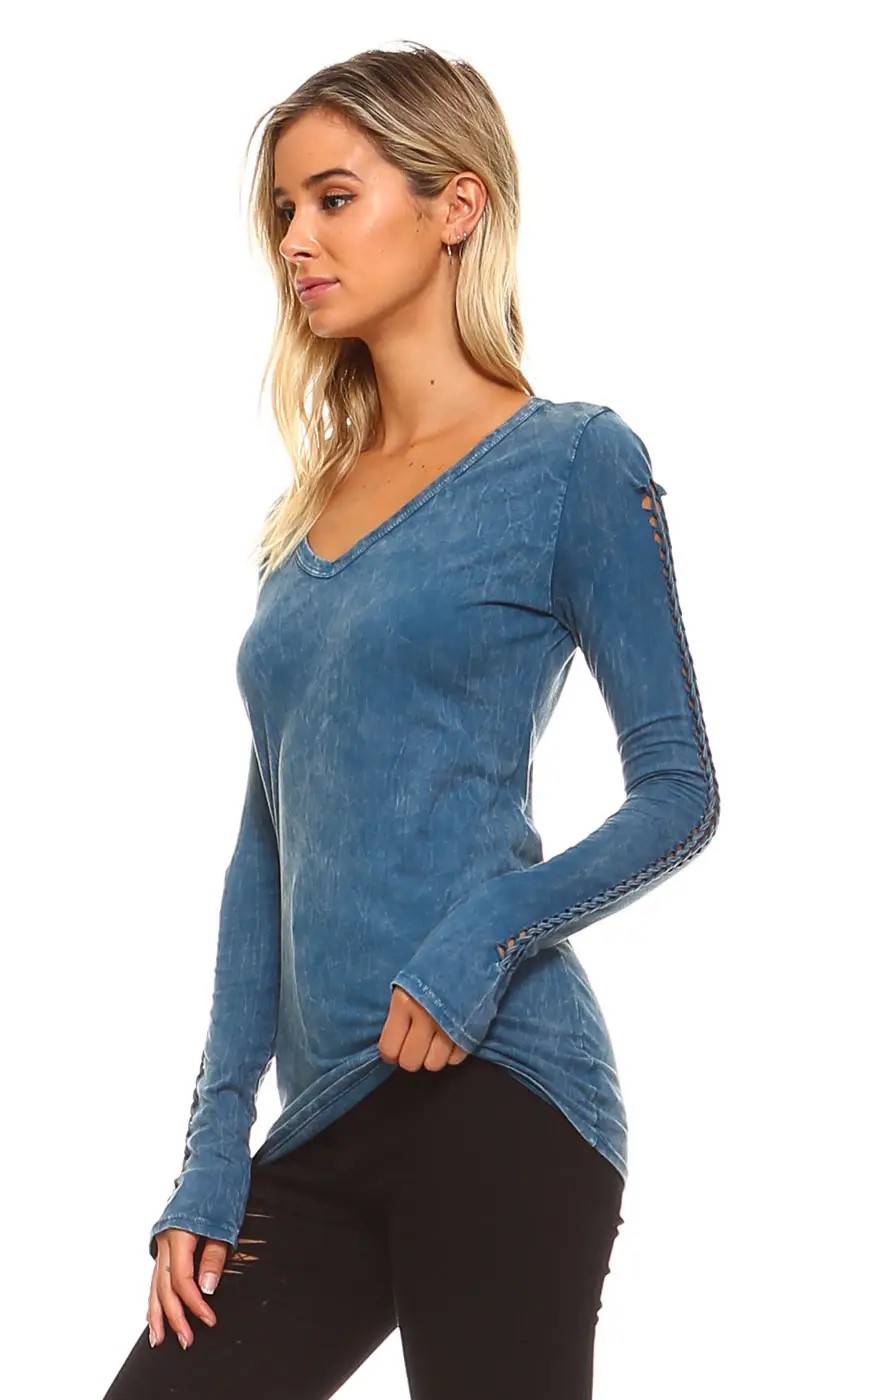 Braided Long Sleeve Mineral Washed Top Teal Blue Made in USA